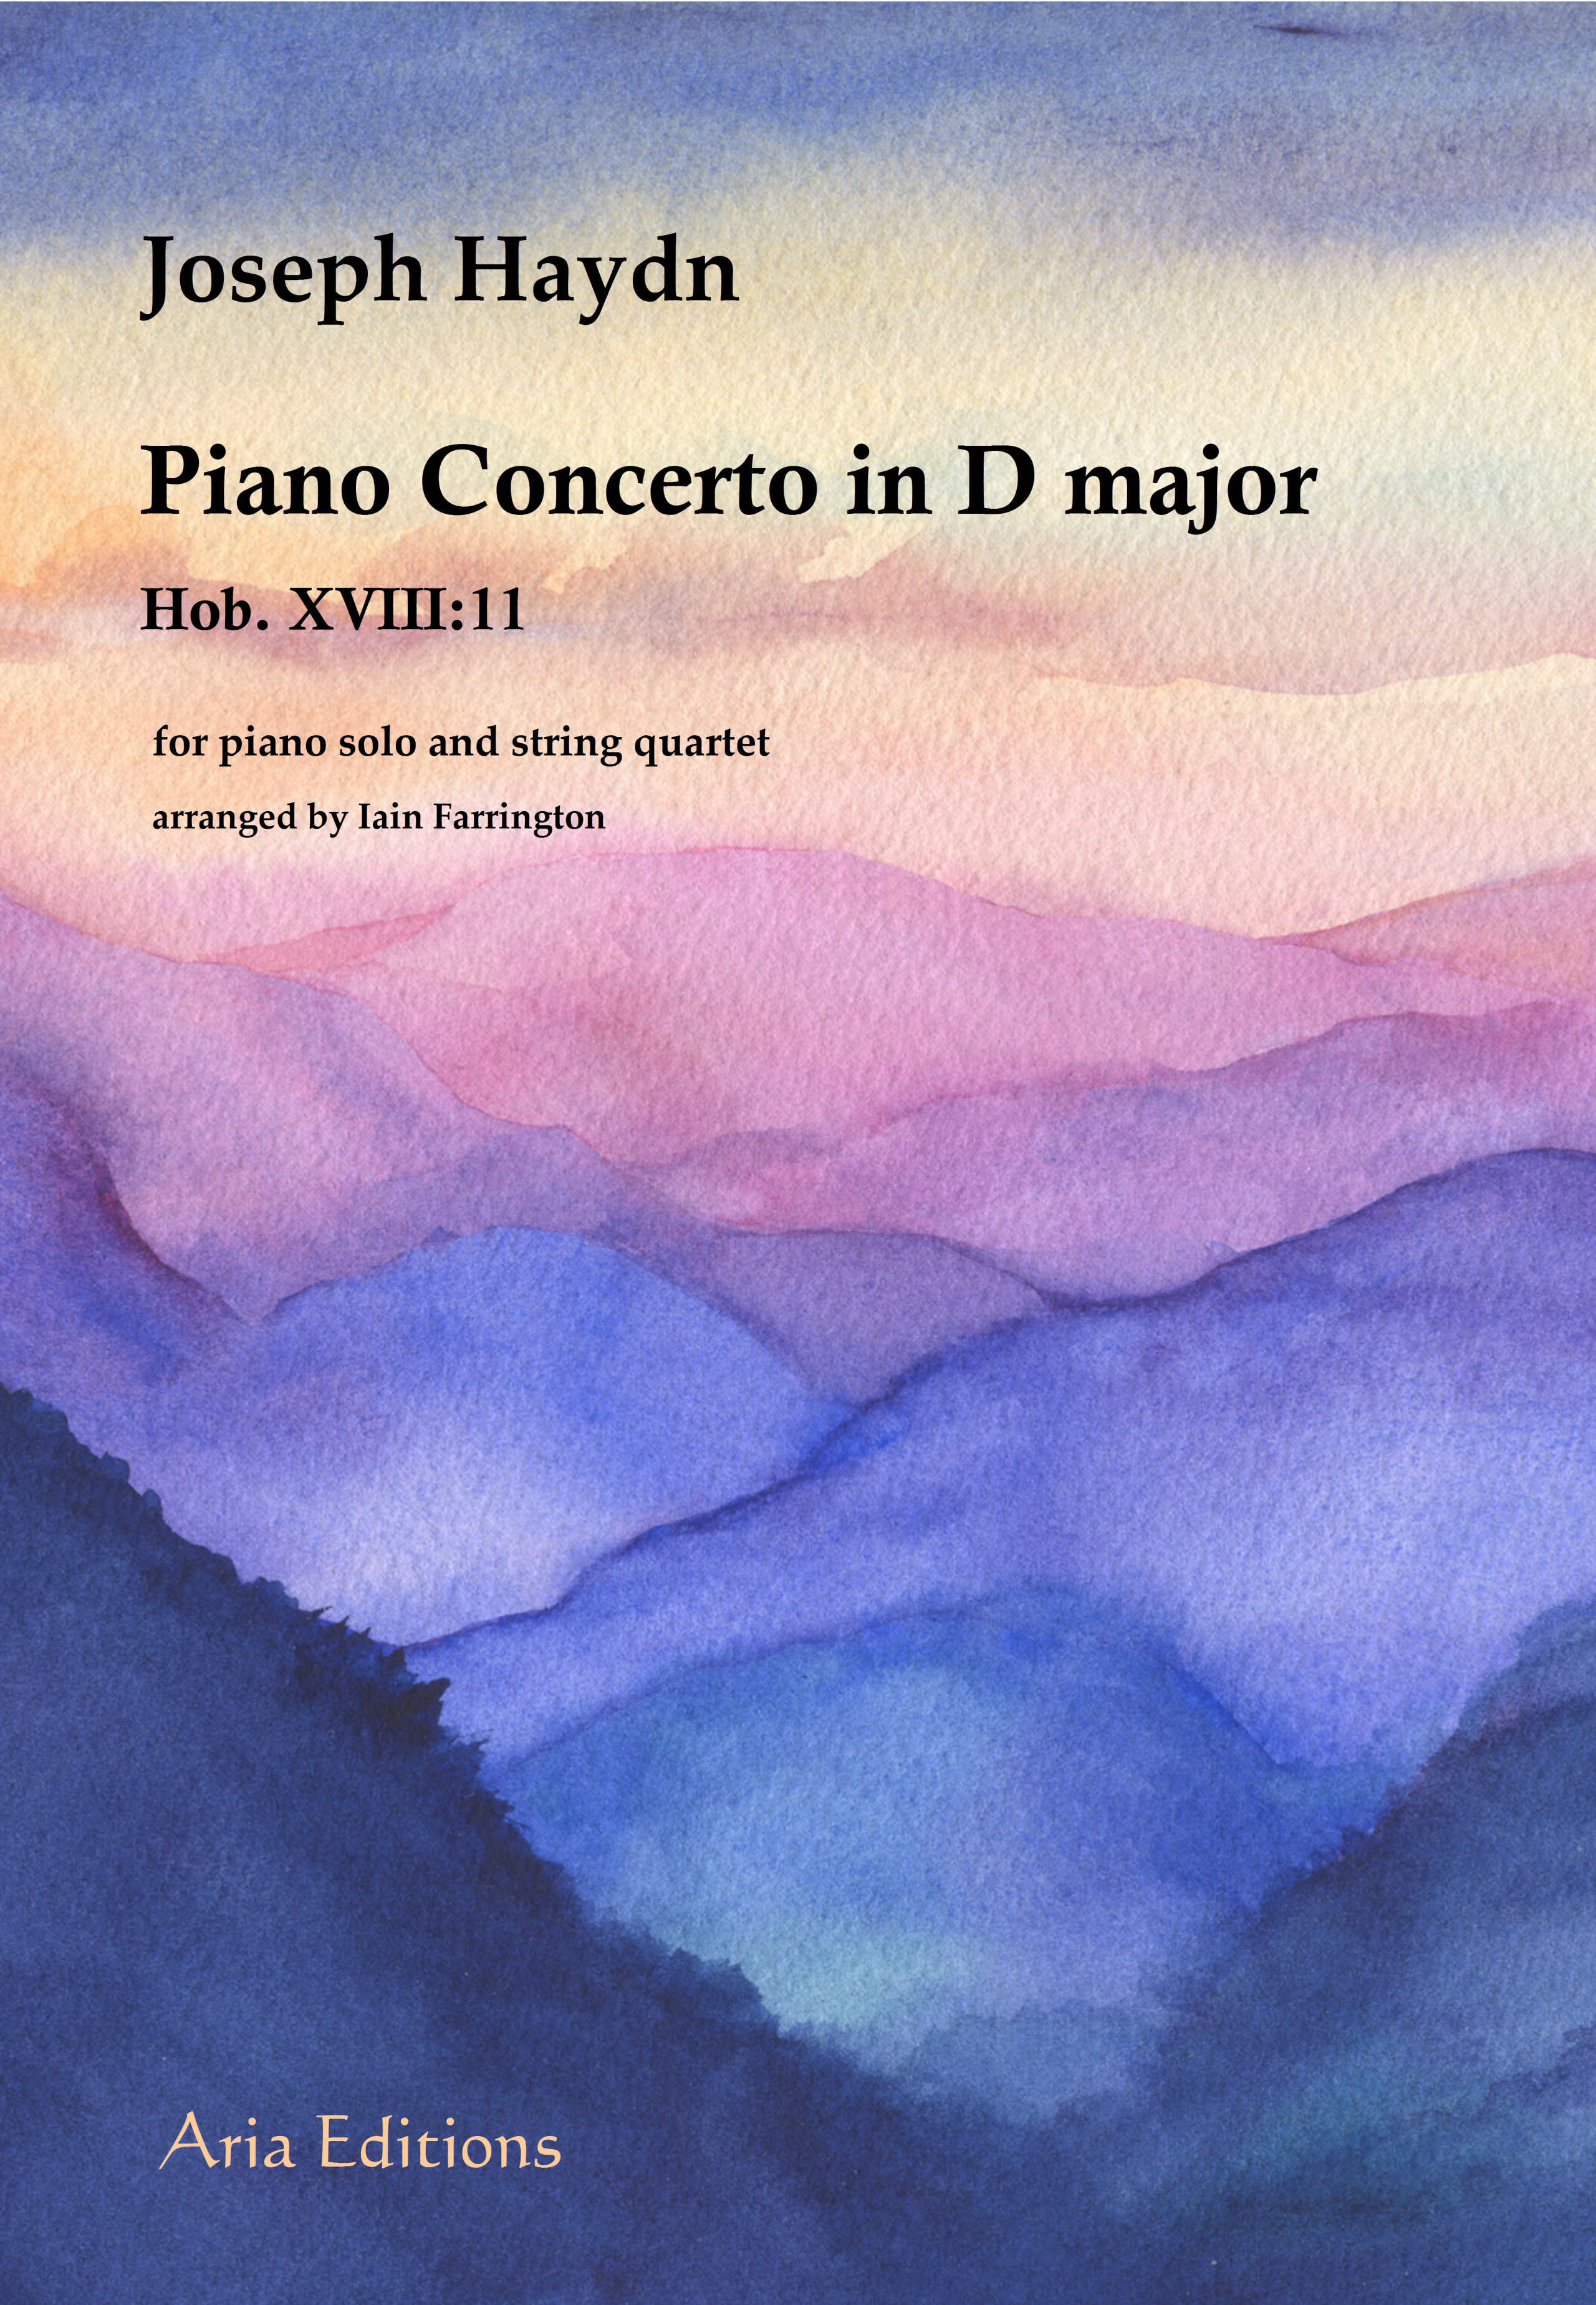 Haydn - Piano Concerto in D major (score and parts) - purchase